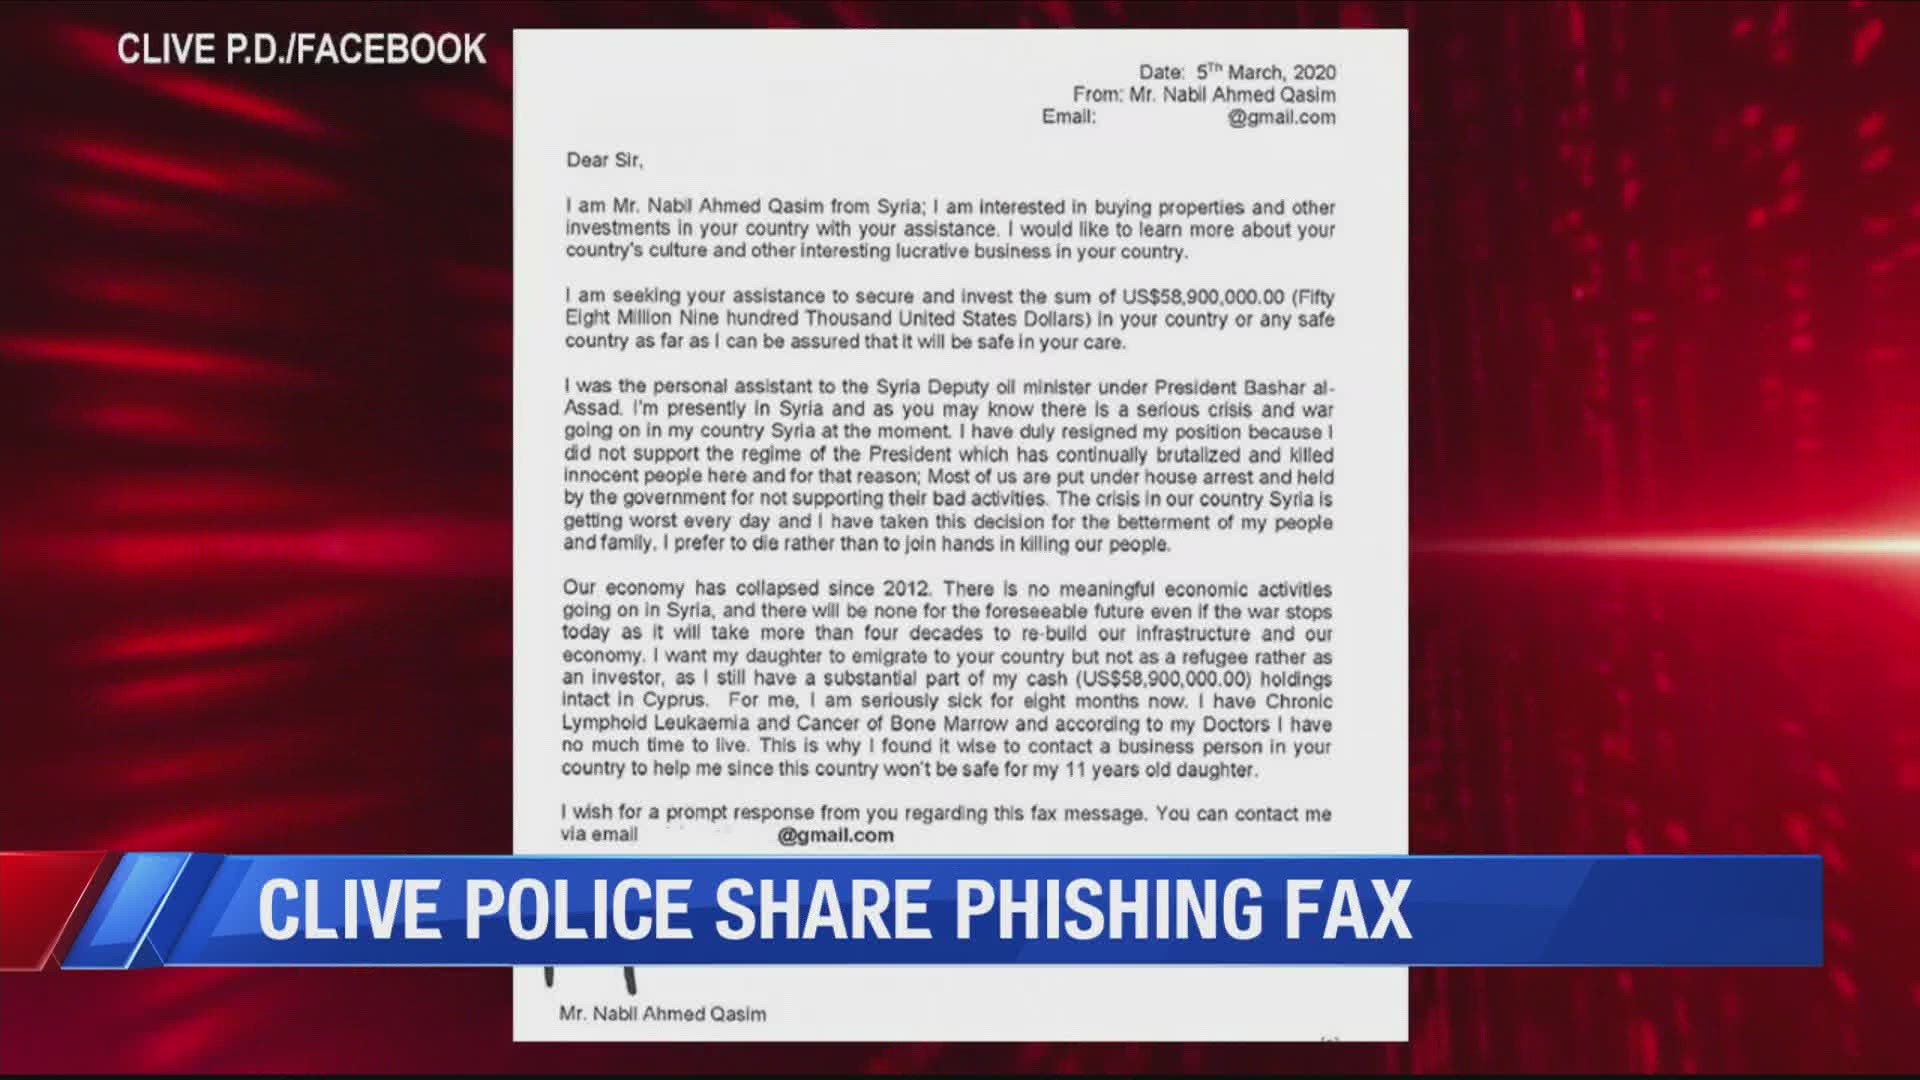 The Clive Fire Department received a phishing fax, and police there shared it on social media this week.